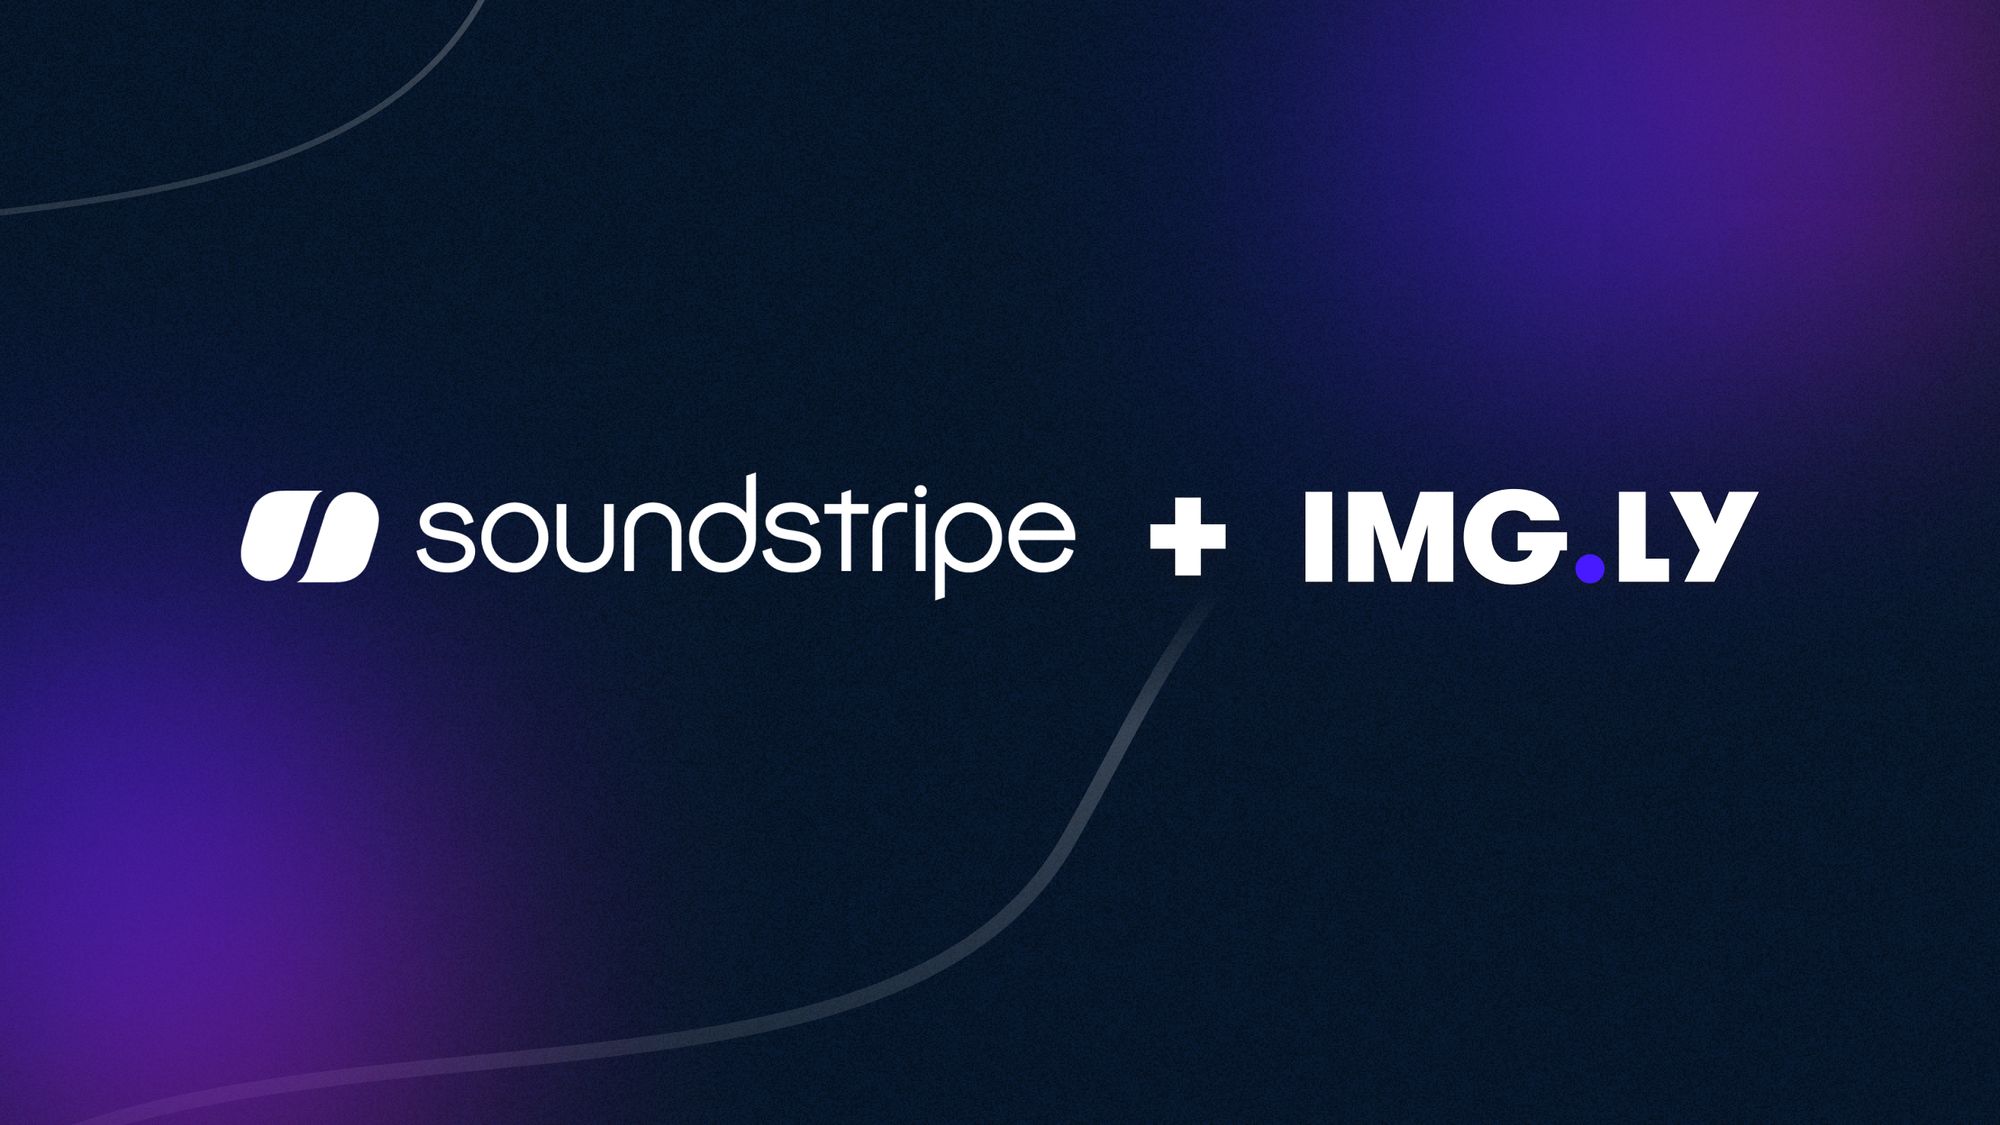 IMG.LY Partners with Soundstripe to Infuse Video Editing with Epic Royalty-Free Music & SFX